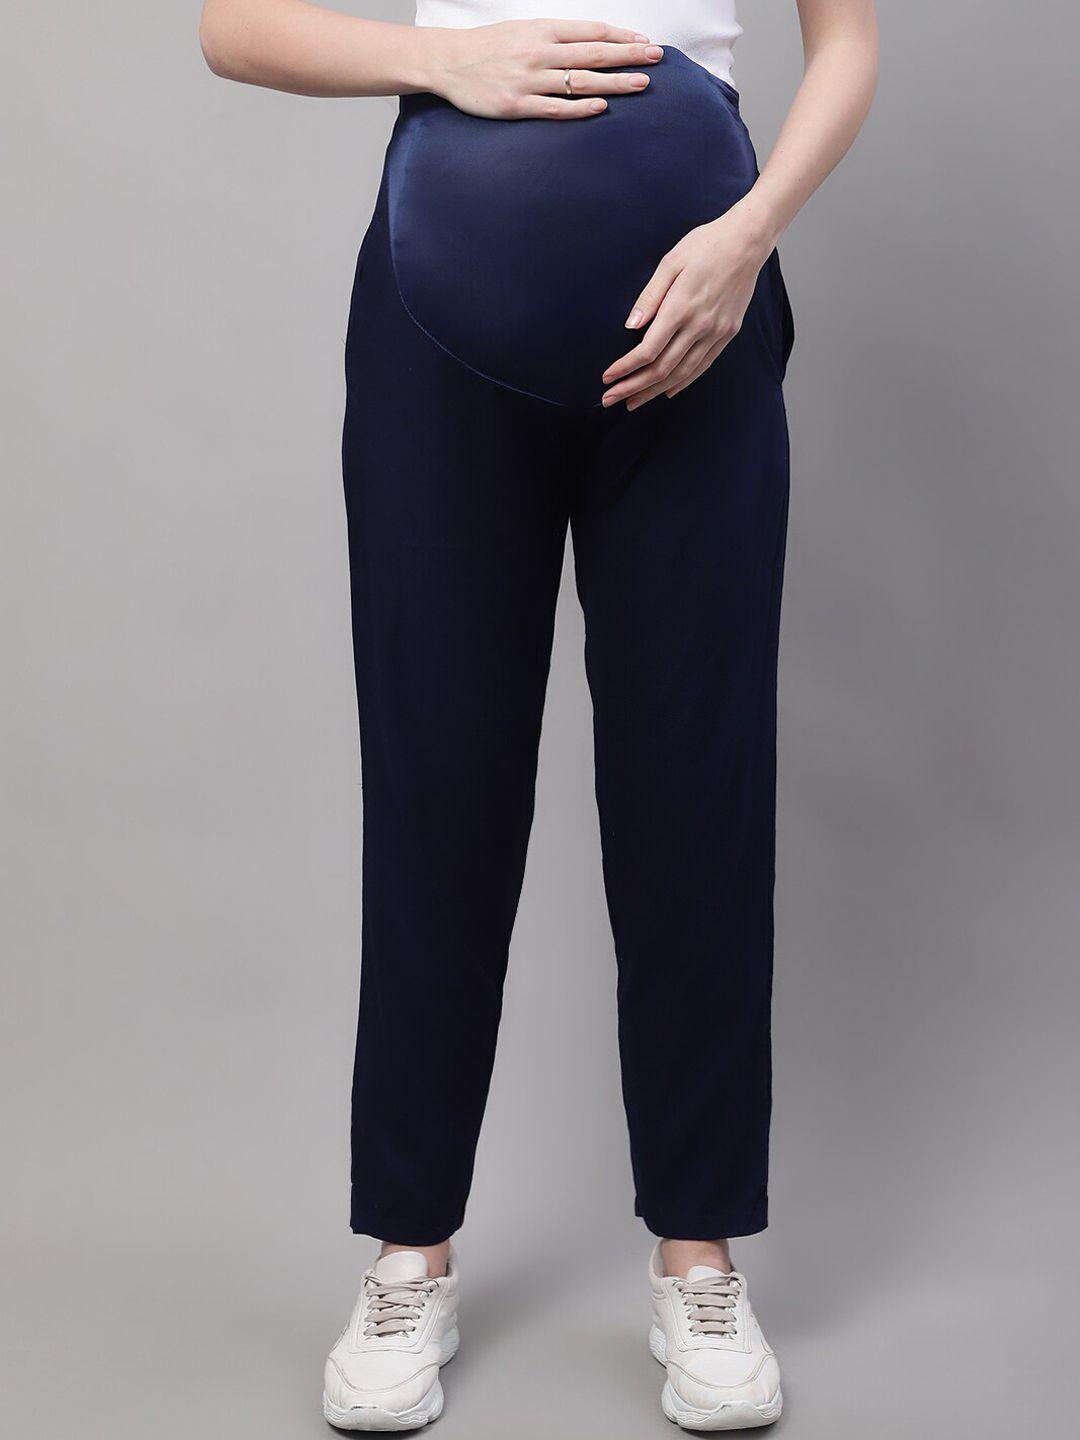 moms-maternity-women-relaxed-mom-fit-maternity-trousers